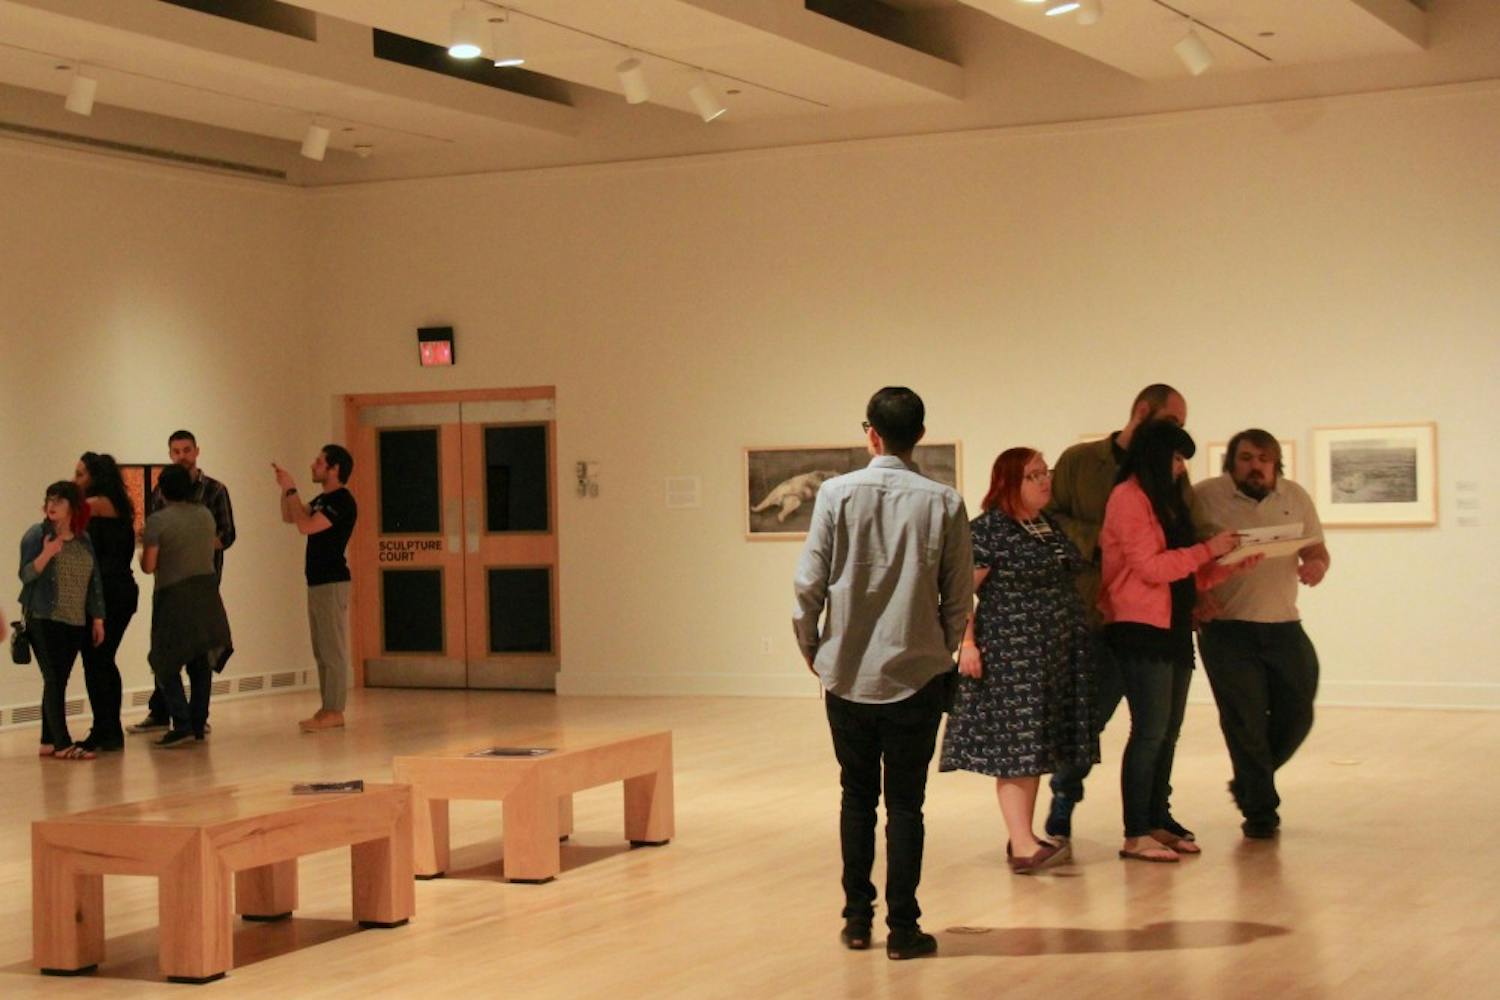 Participants in the "escape room" even&nbsp;try to find clues at the ASU Art Museum on Friday,&nbsp;March 31, 2017.